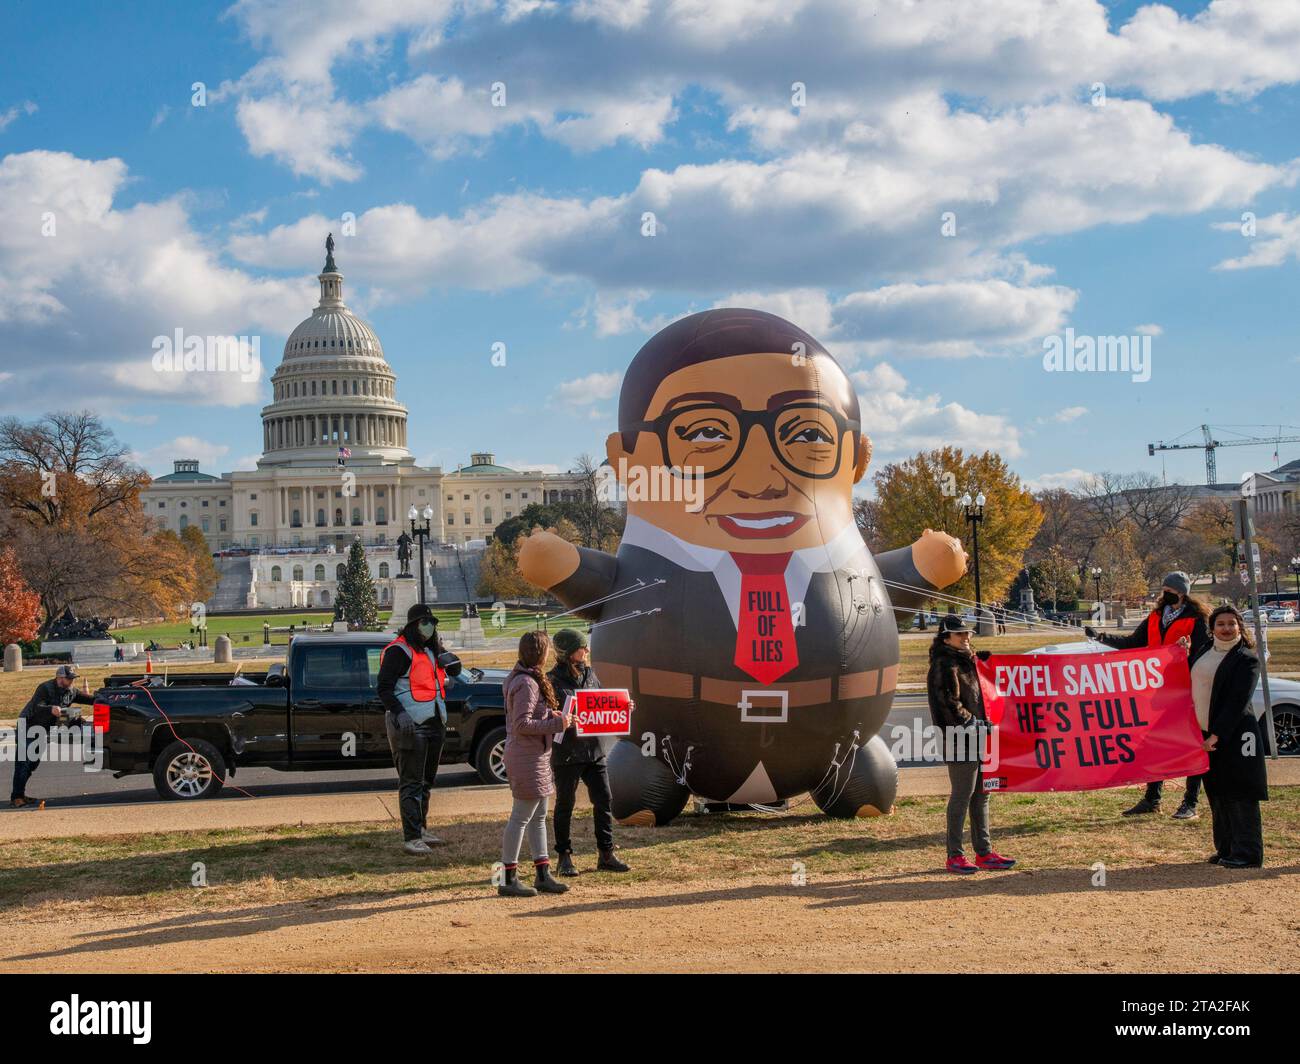 An Oversized blimp of the now expelled former Congressman, George Santos, R-NY is on display on the National Mall in Washington DC.  Patsy Lynch/Alamy Stock Photo